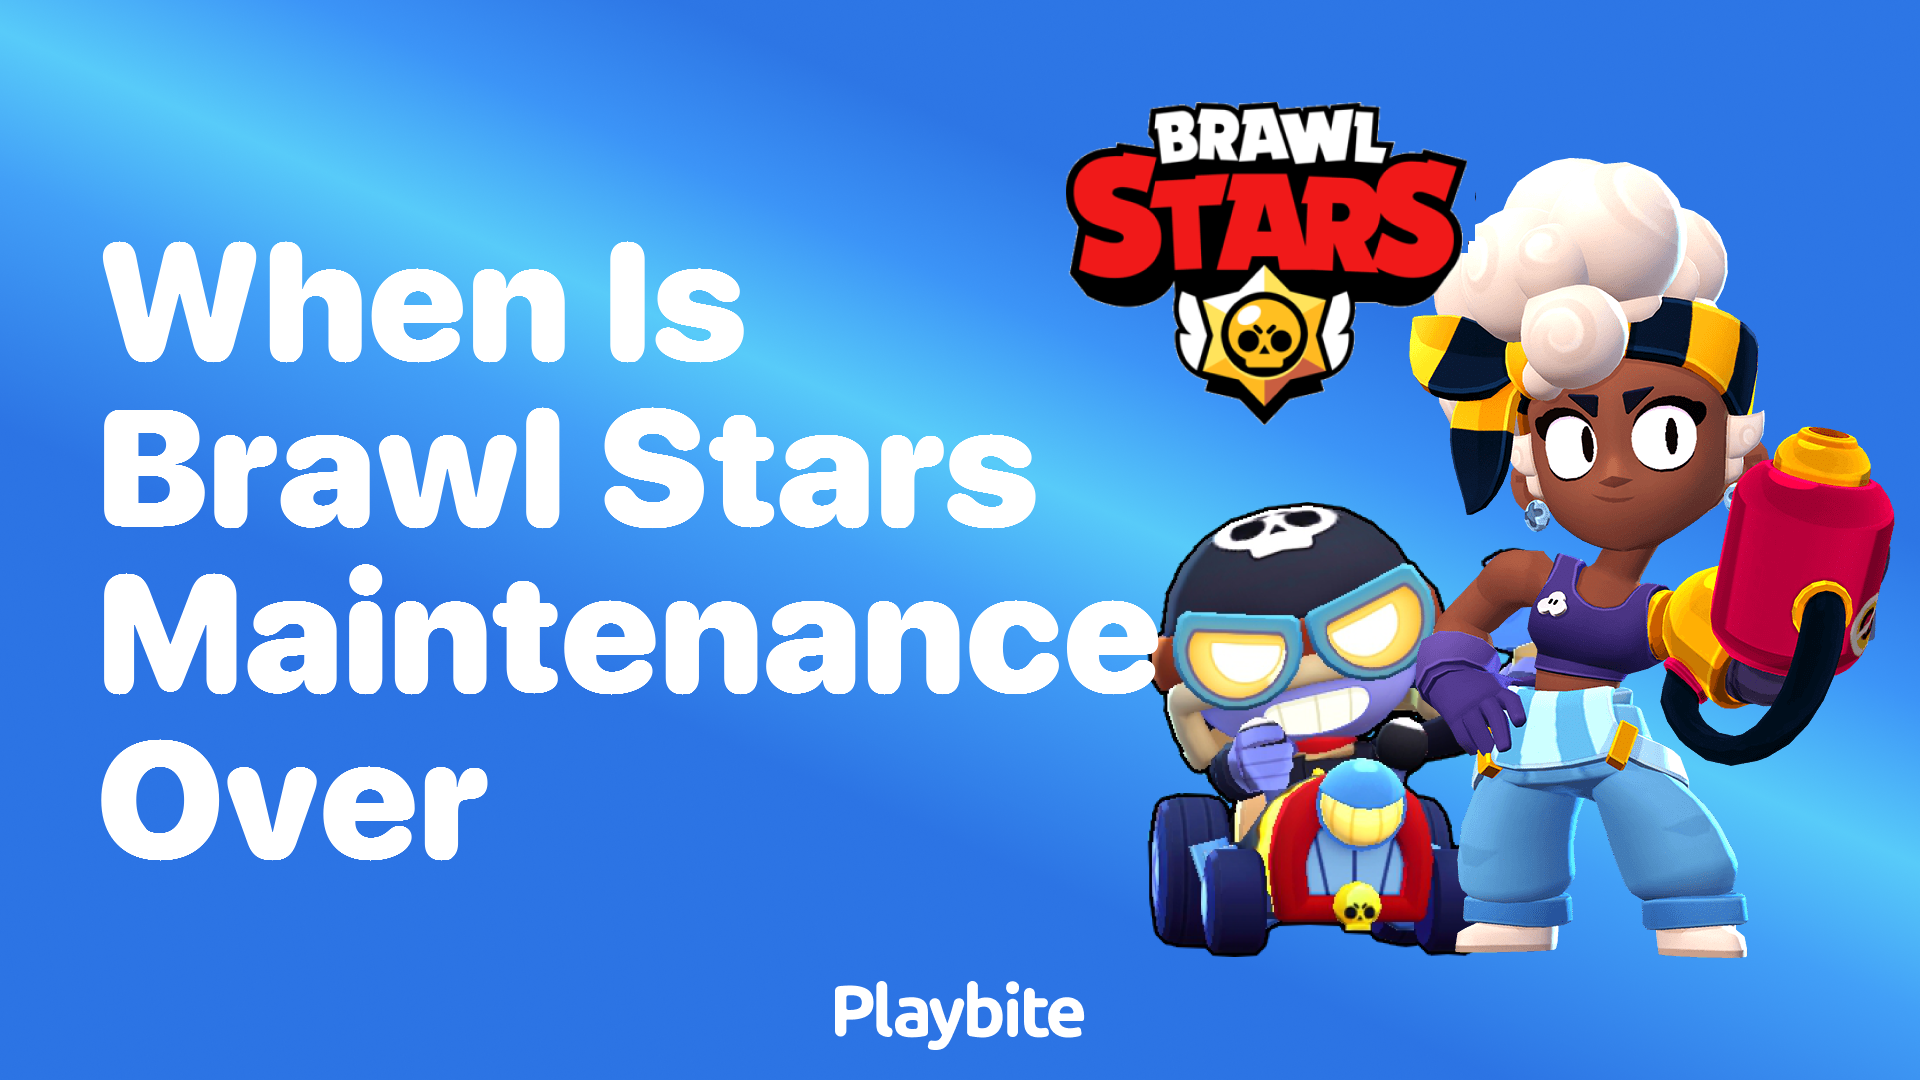 When is Brawl Stars Maintenance Over? Find Out Here!